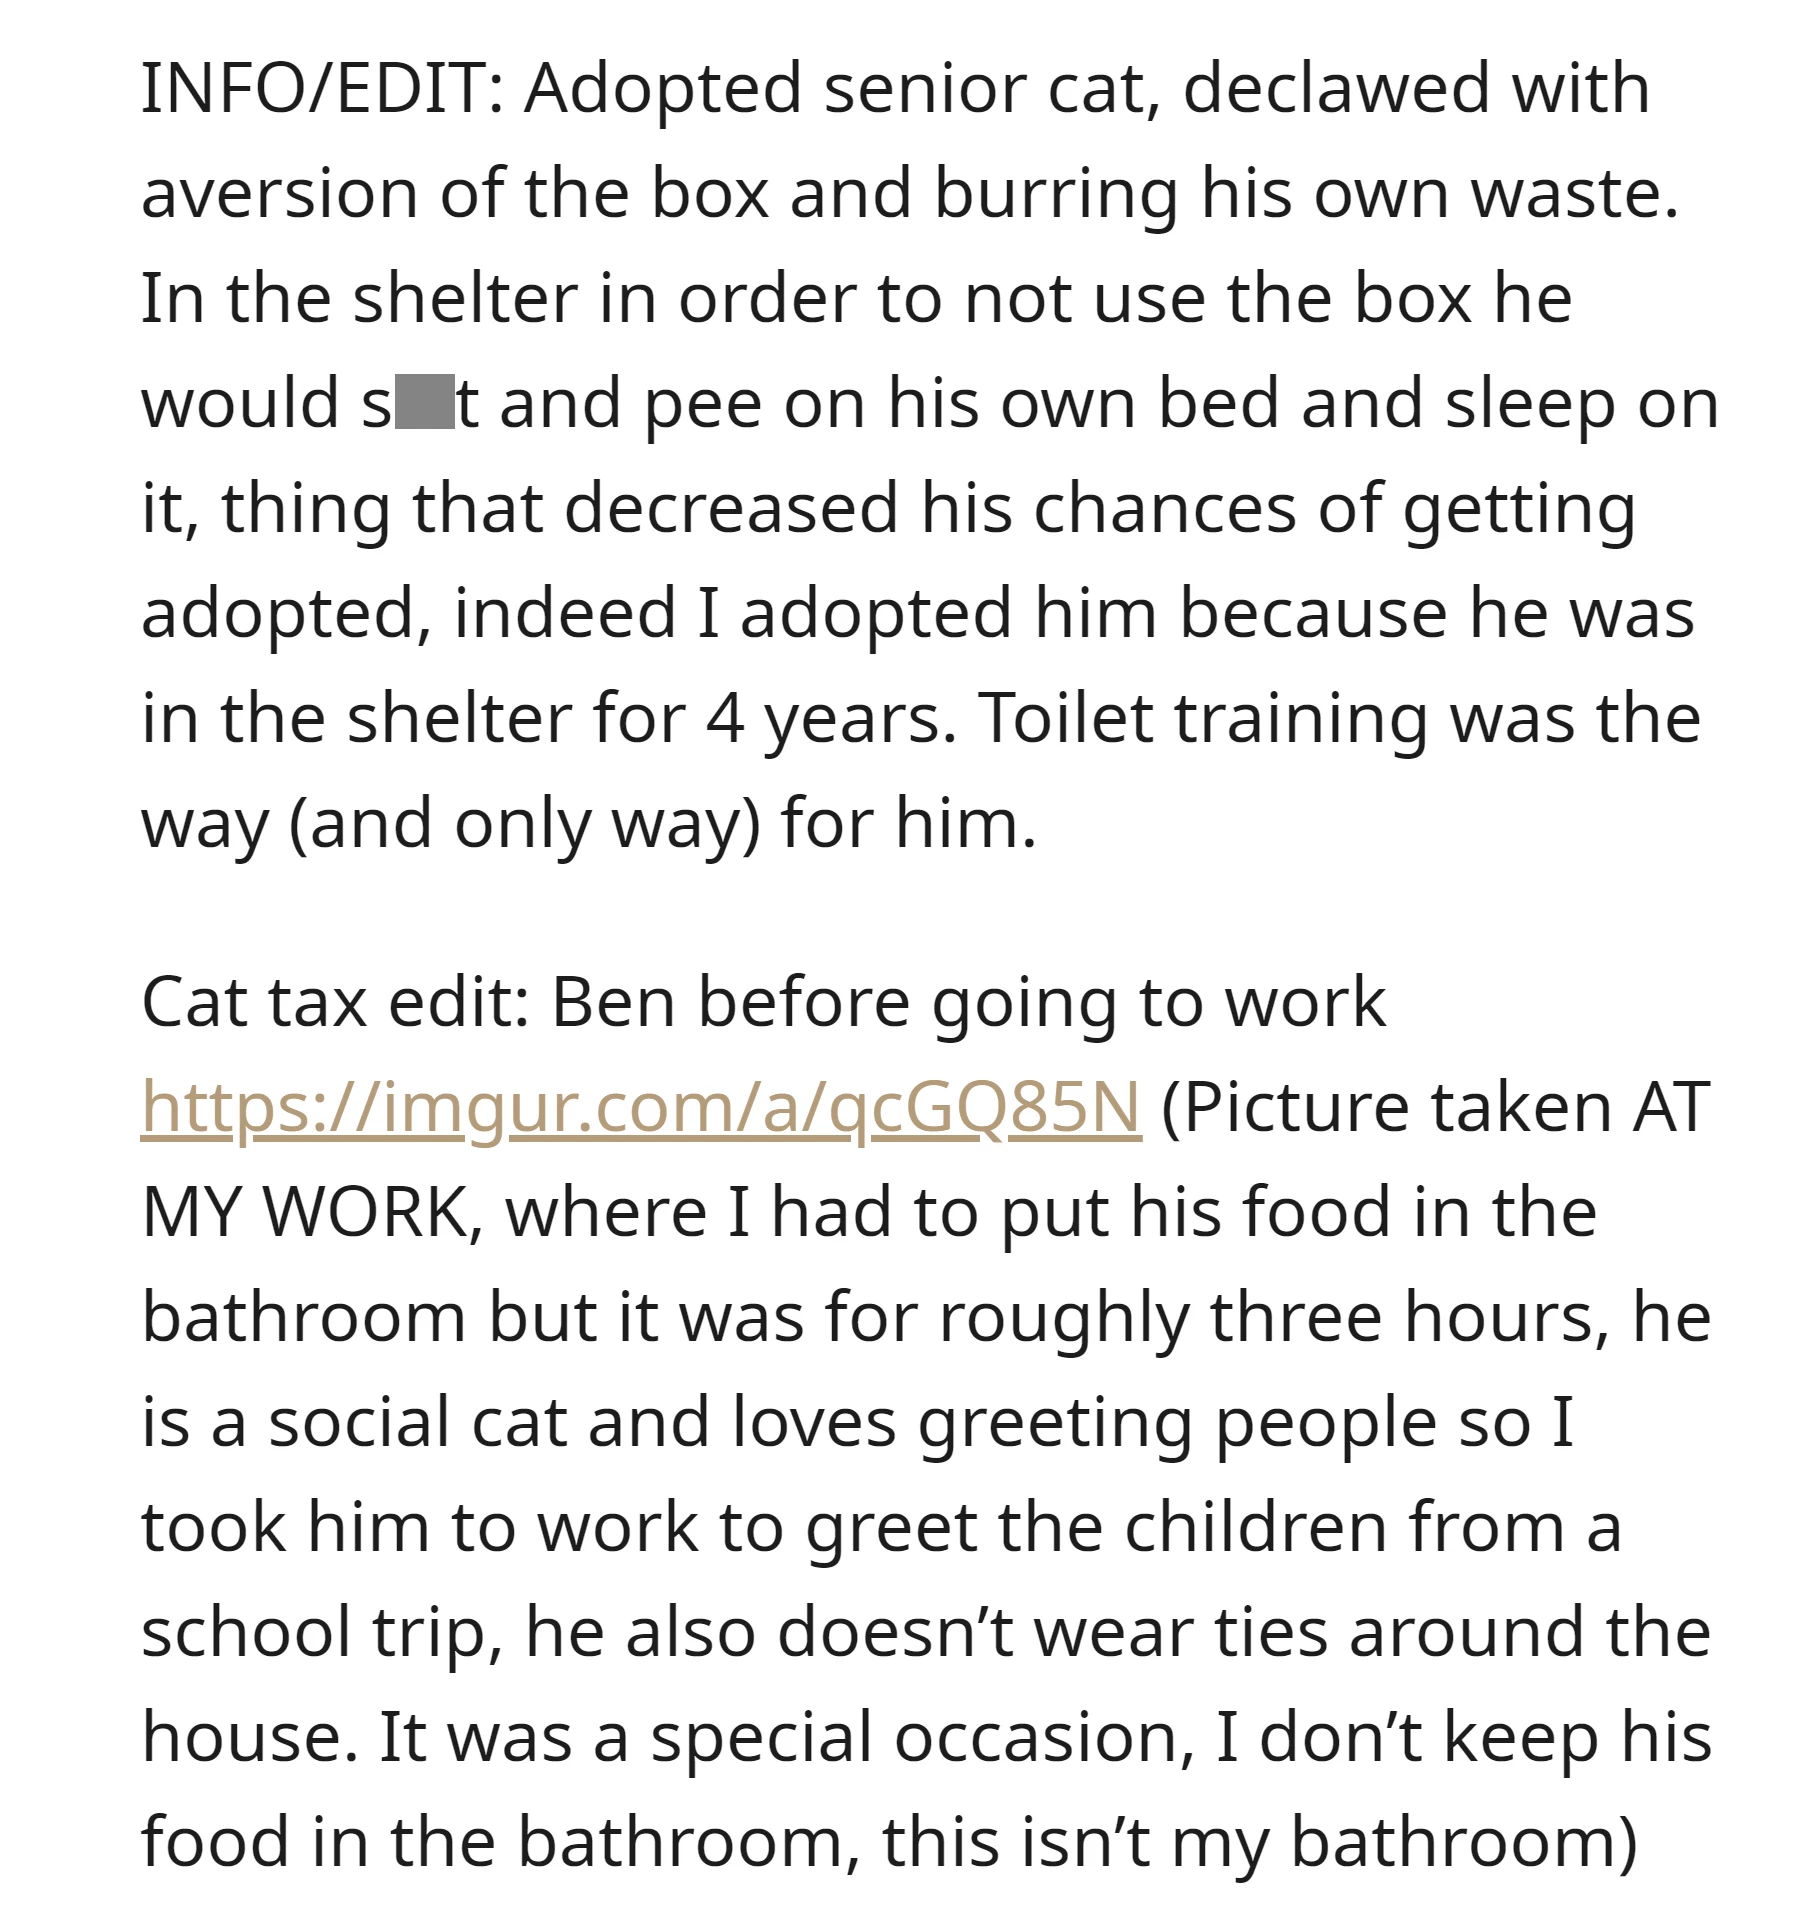 The cat has an aversion to the litter box and a history of soiling his bed in the shelter